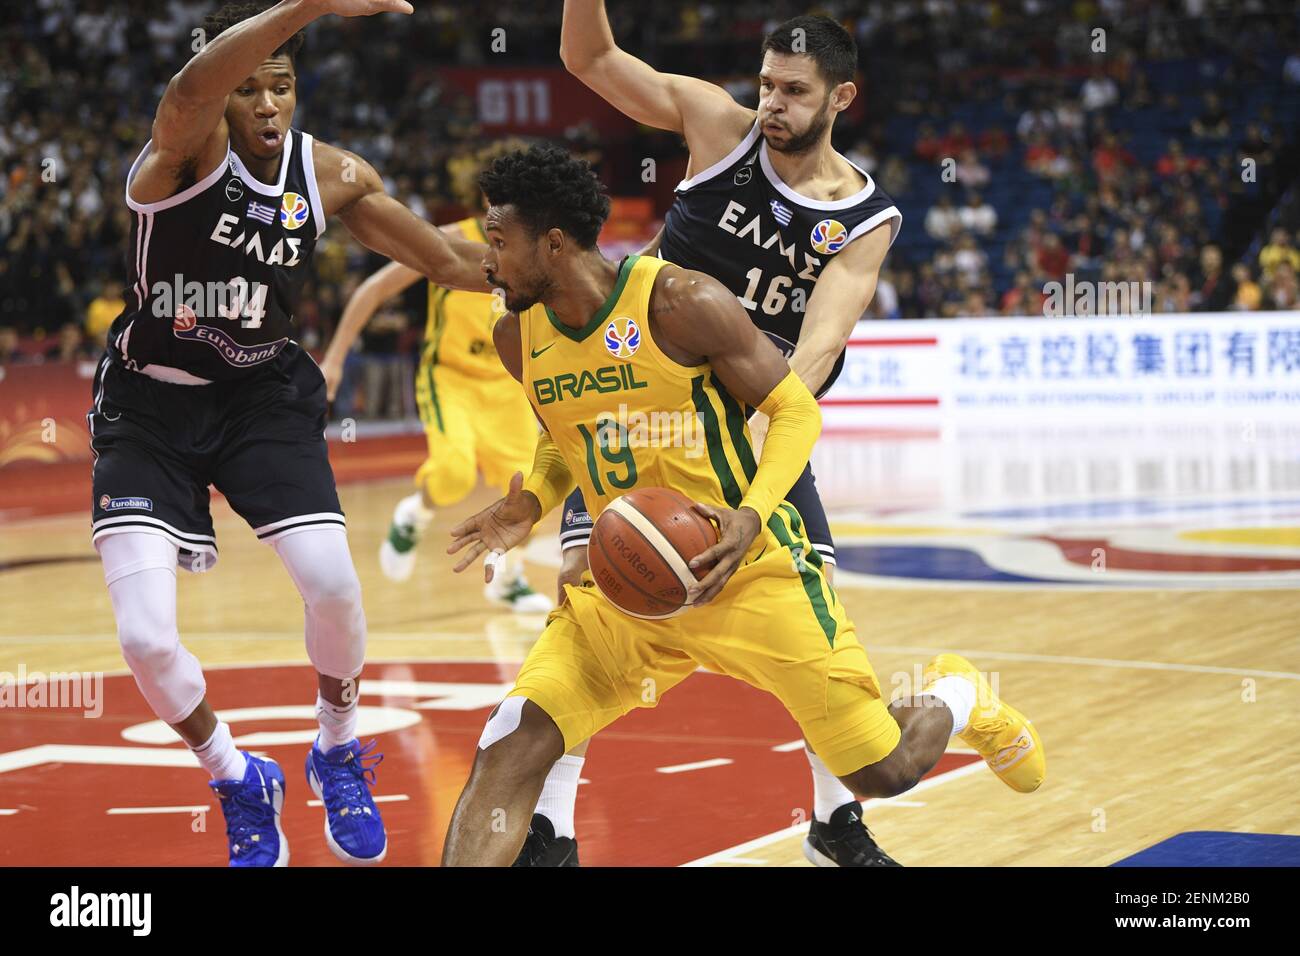 Greek professional basketball player for the Milwaukee Bucks of the  National Basketball Association (NBA) Giannis Antetokounmpo, left, tries to  get the ball at the second round of Group F Brazil vs Greece